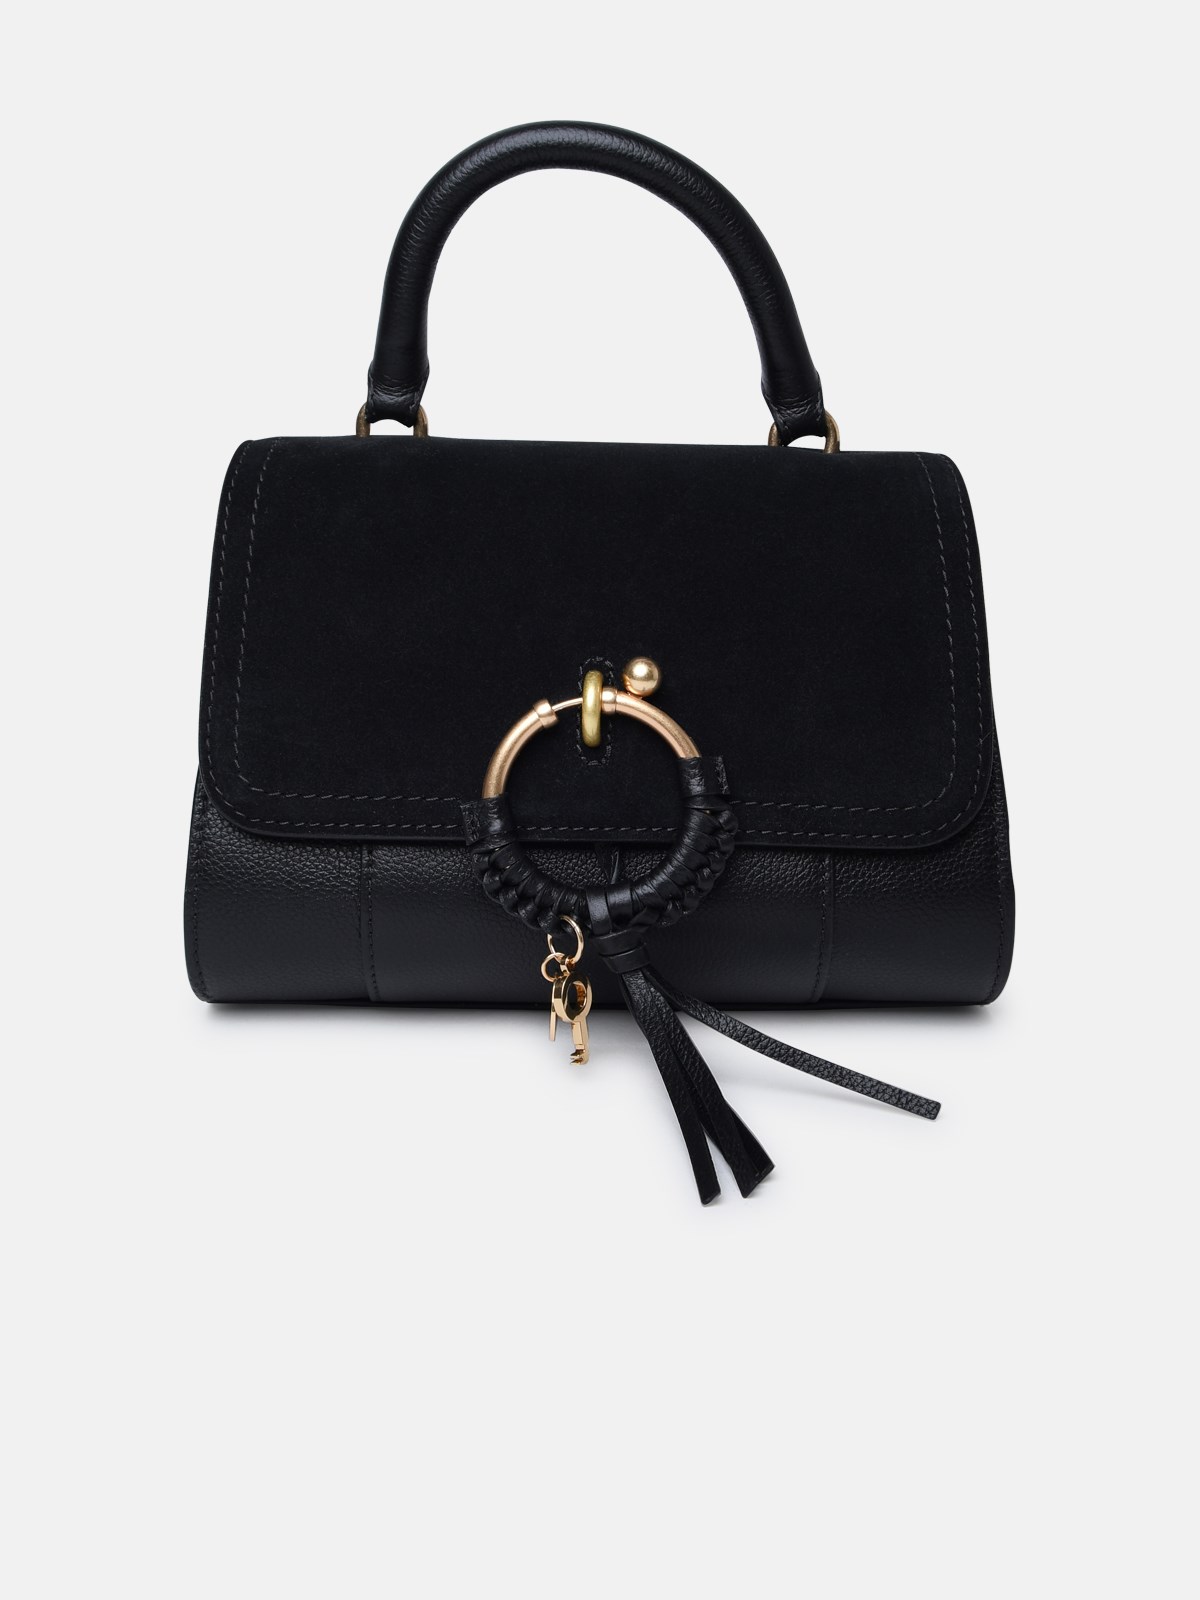 See By Chloé Black Leather Bag